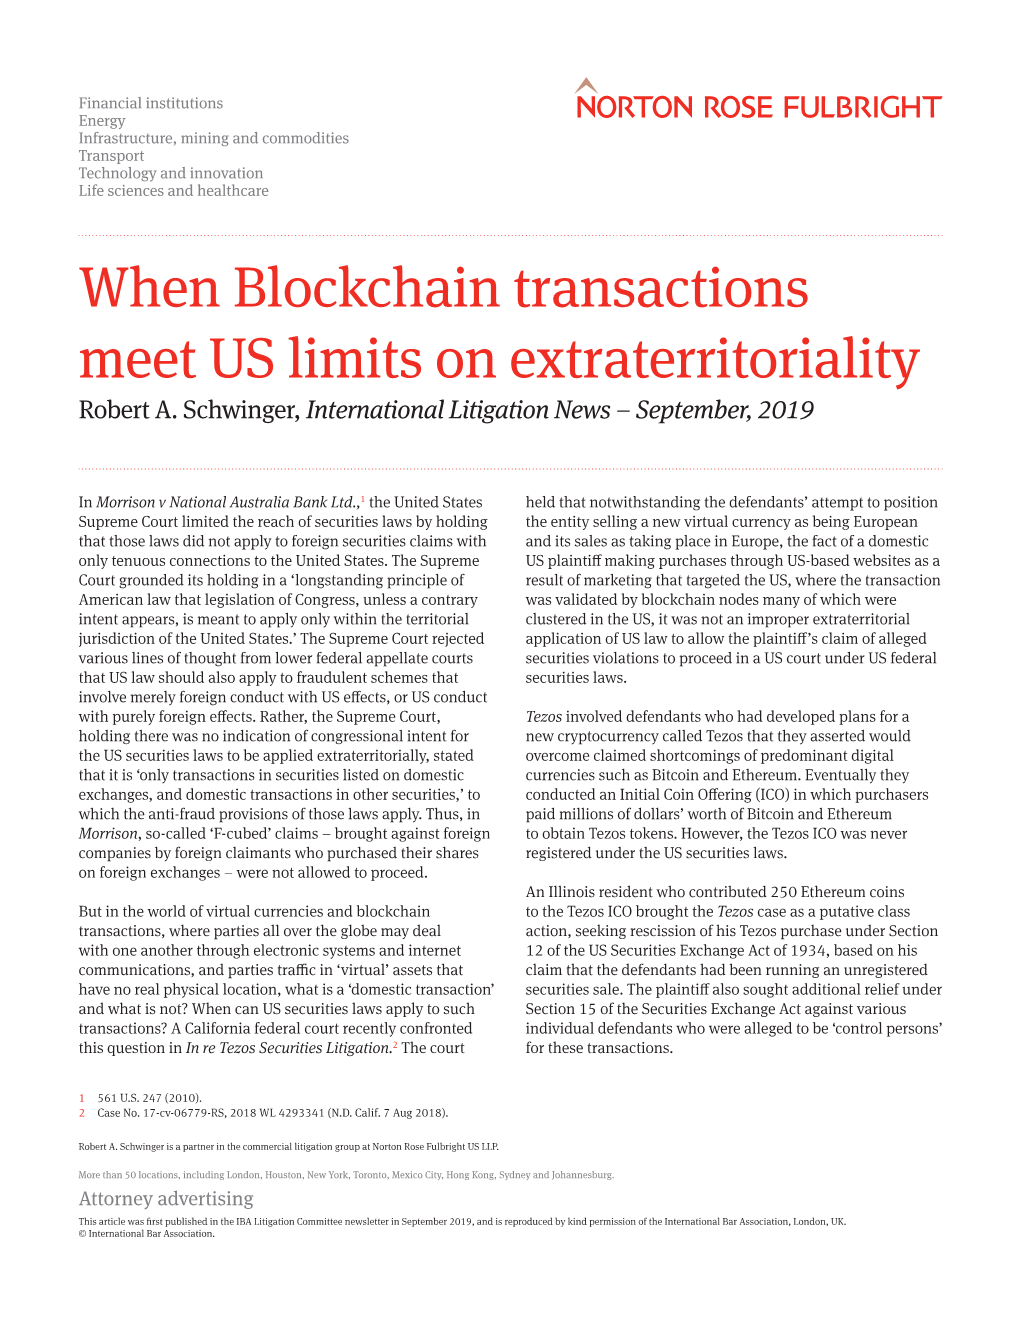 When Blockchain Transactions Meet US Limits on Extraterritoriality Robert A